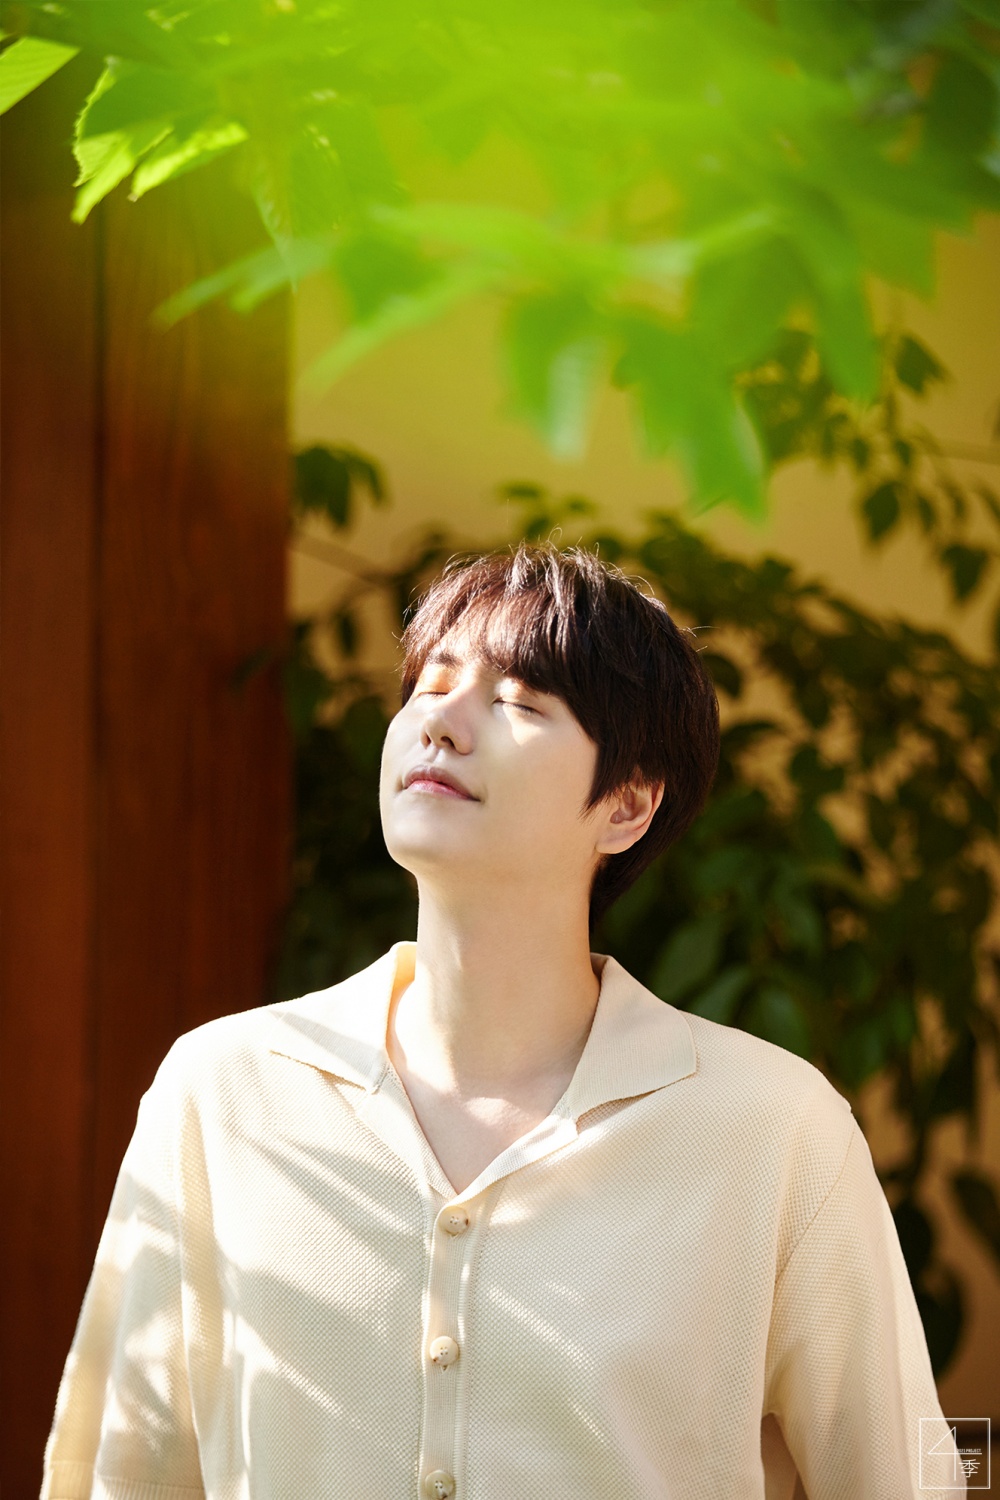 KYUHYUN, today's new song 'Together' MV teaser released... cool summer song